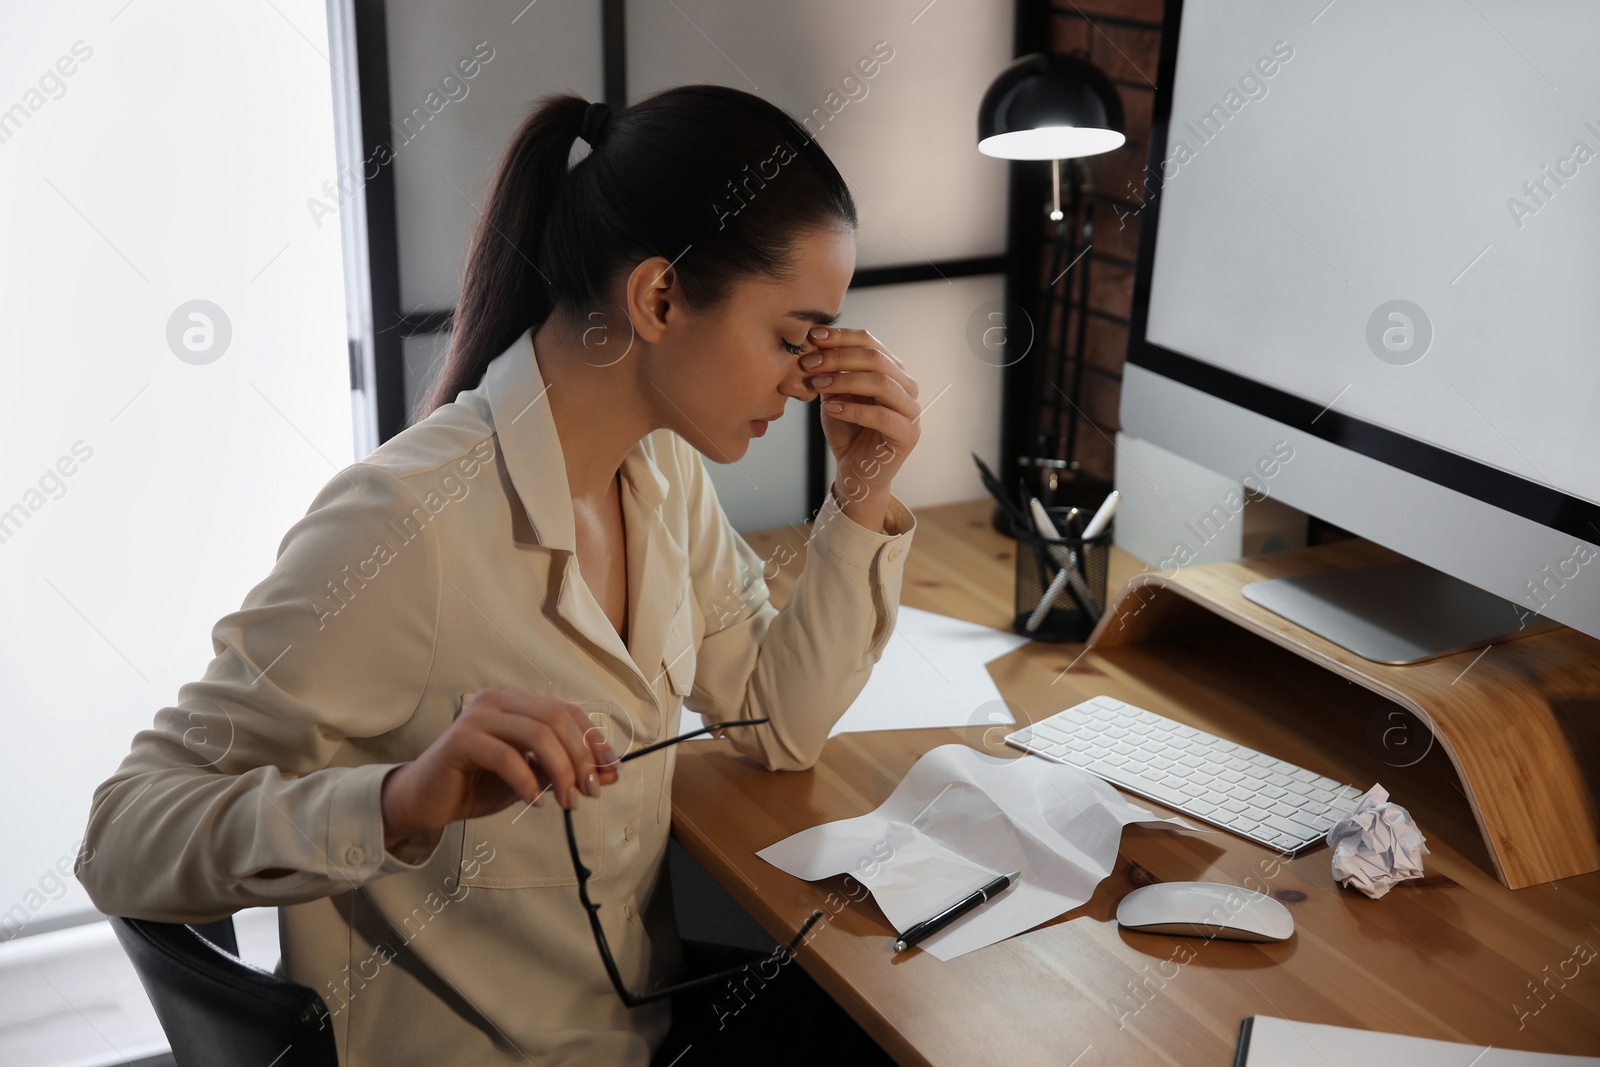 Photo of Stressed and tired young woman with headache at workplace